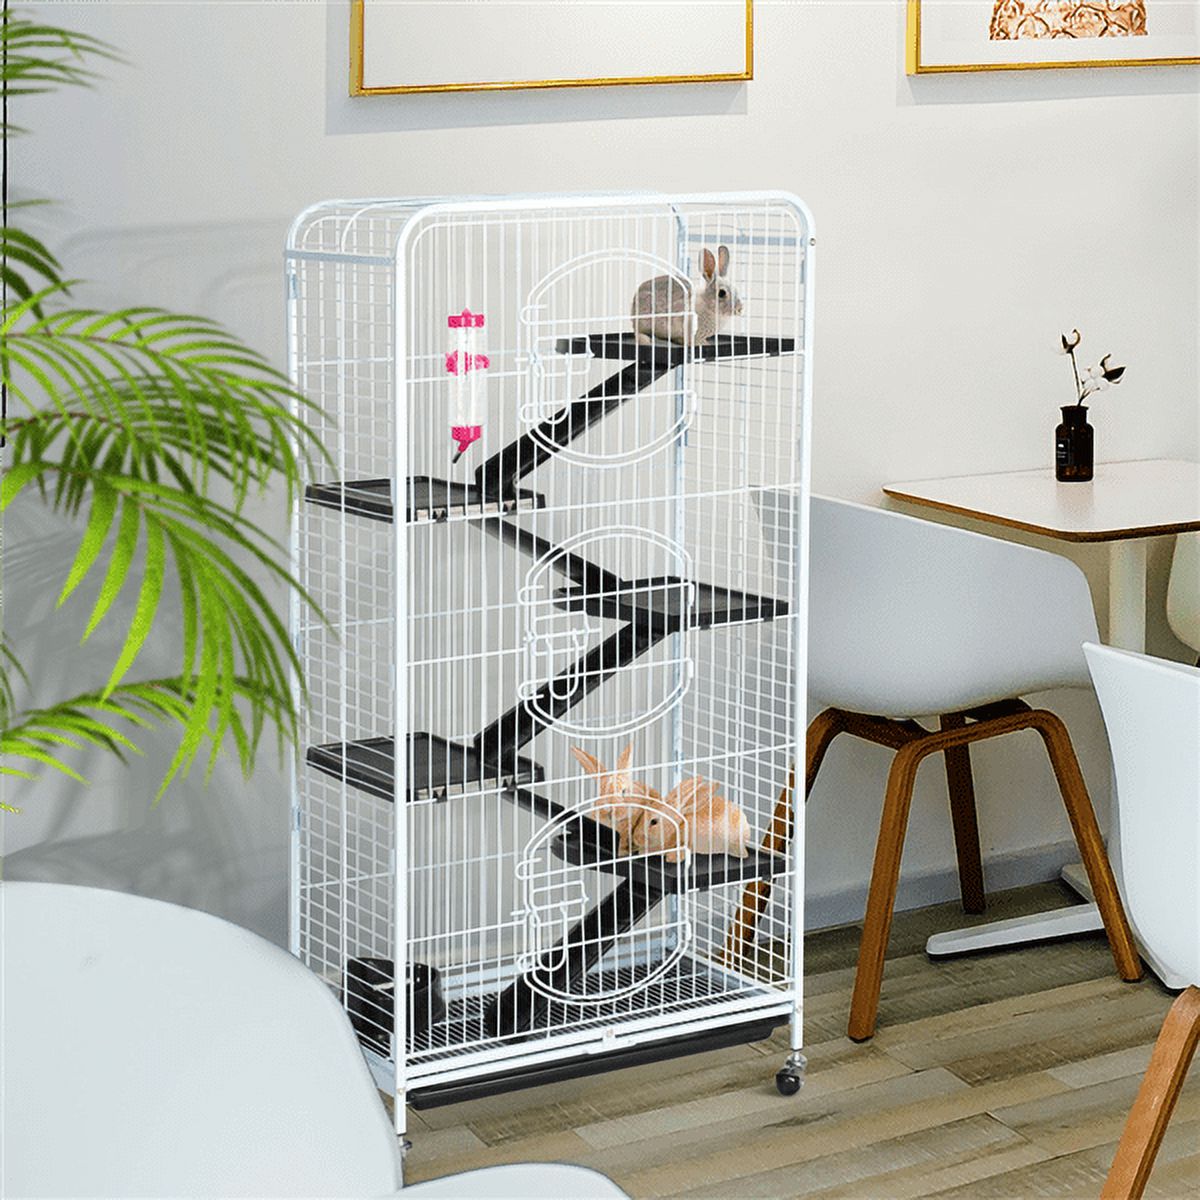 Alden Design 6 Level Rolling Large Pet Cage with 3 Doors, Pet Bowl, and Water Bottle for Small Animals, White - image 5 of 9